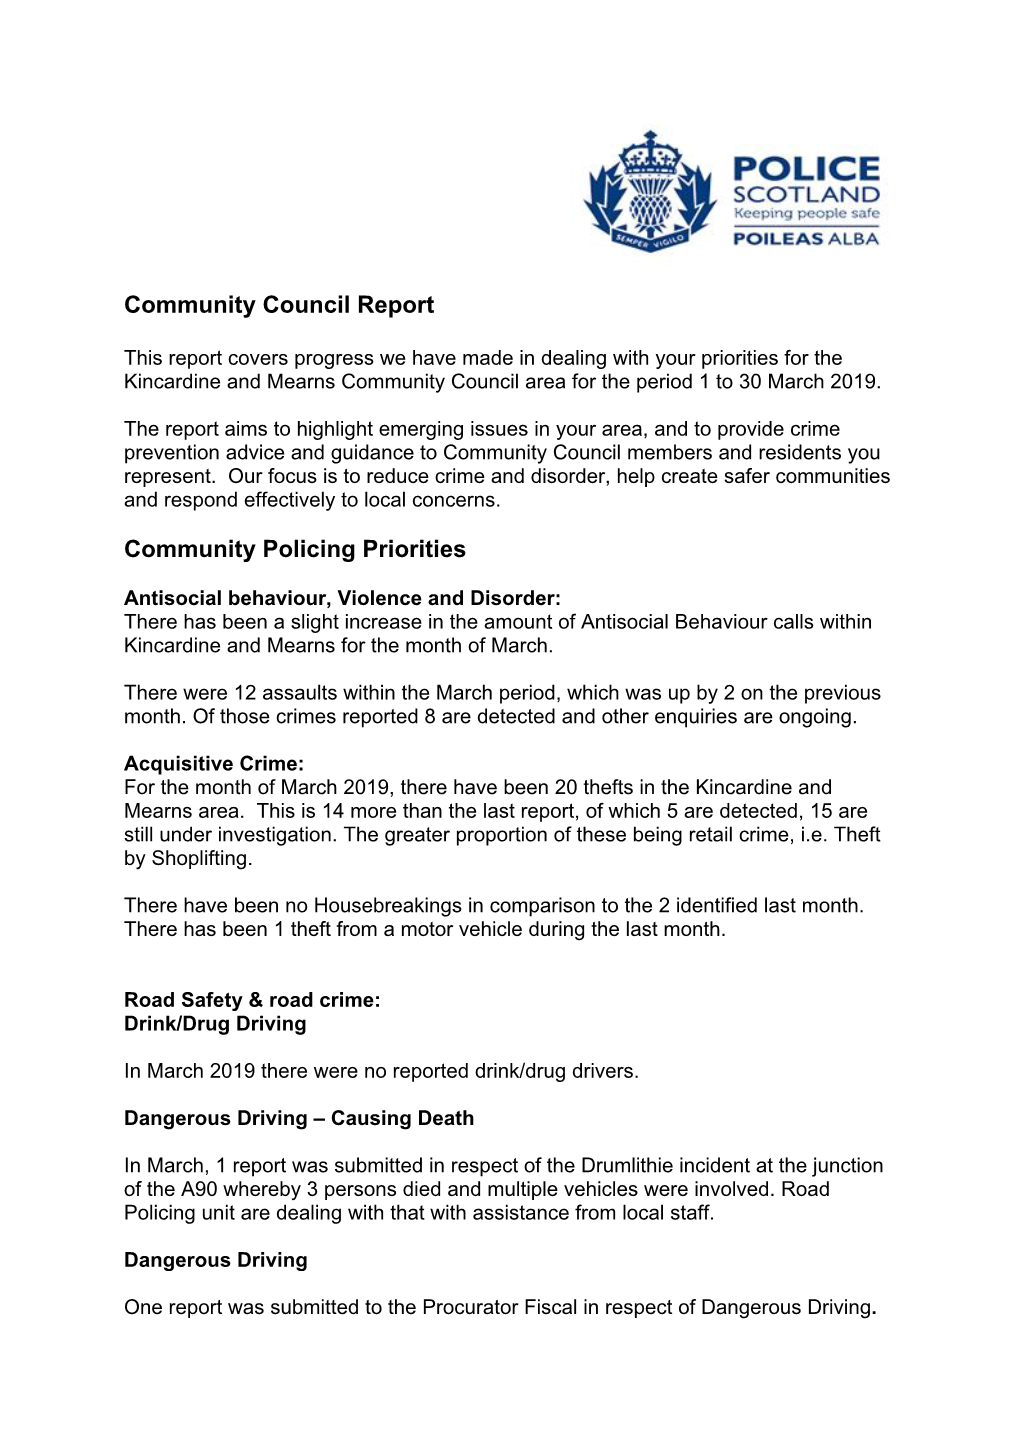 Community Council Report Community Policing Priorities